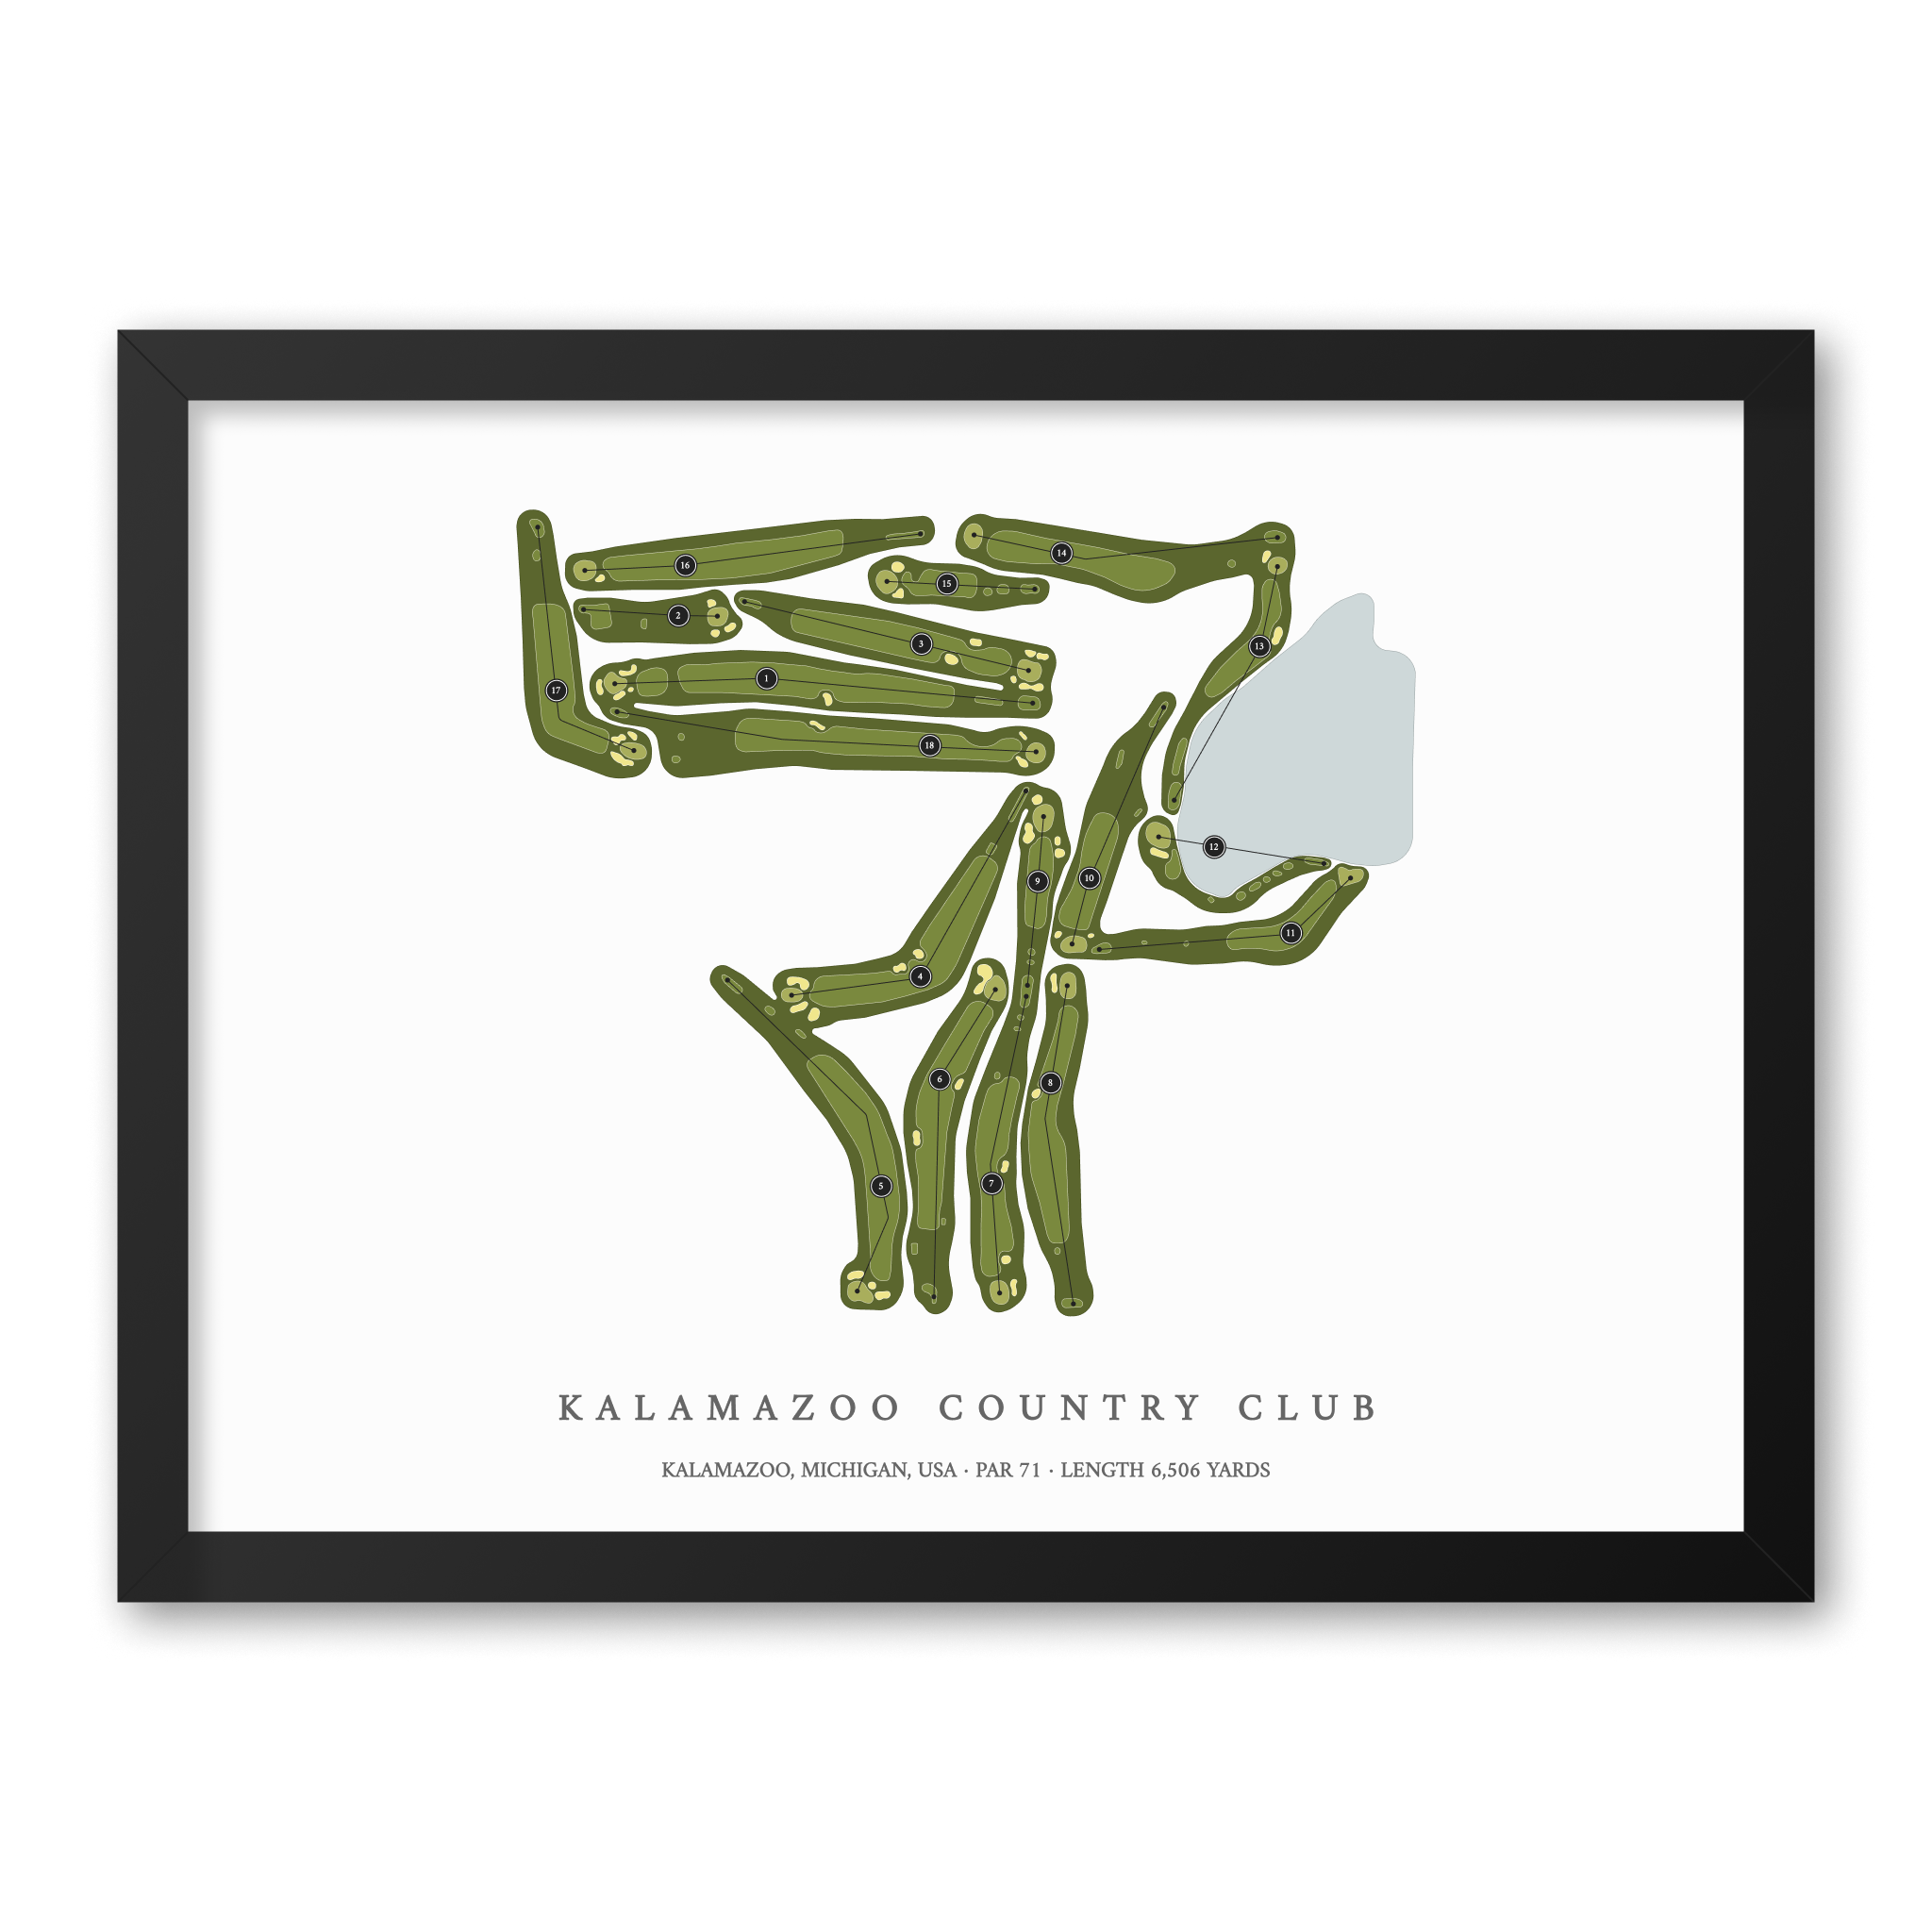 Kalamazoo Country Club| Golf Course Print | Black Frame With Hole Numbers #hole numbers_yes